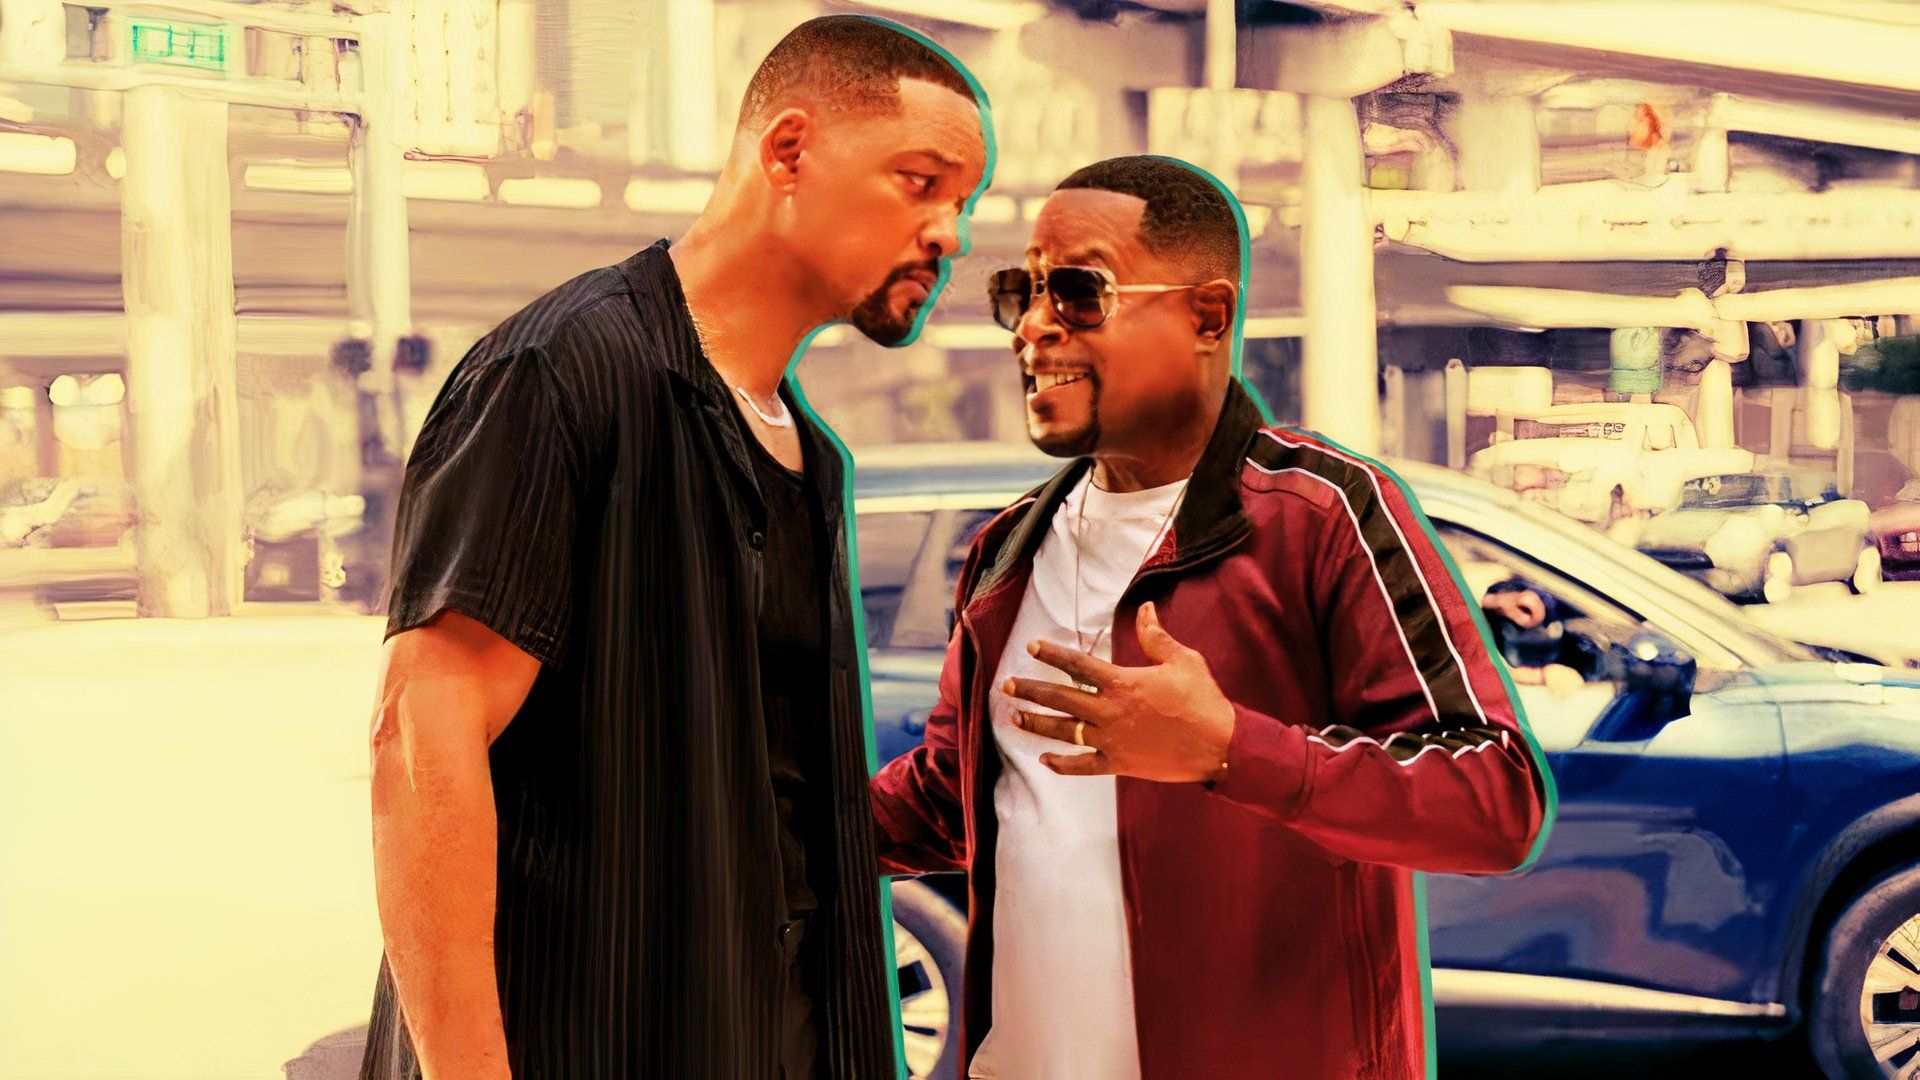 Martin Lawrence & Will Smith in Bad Boys Ride or Die talking to each other outside